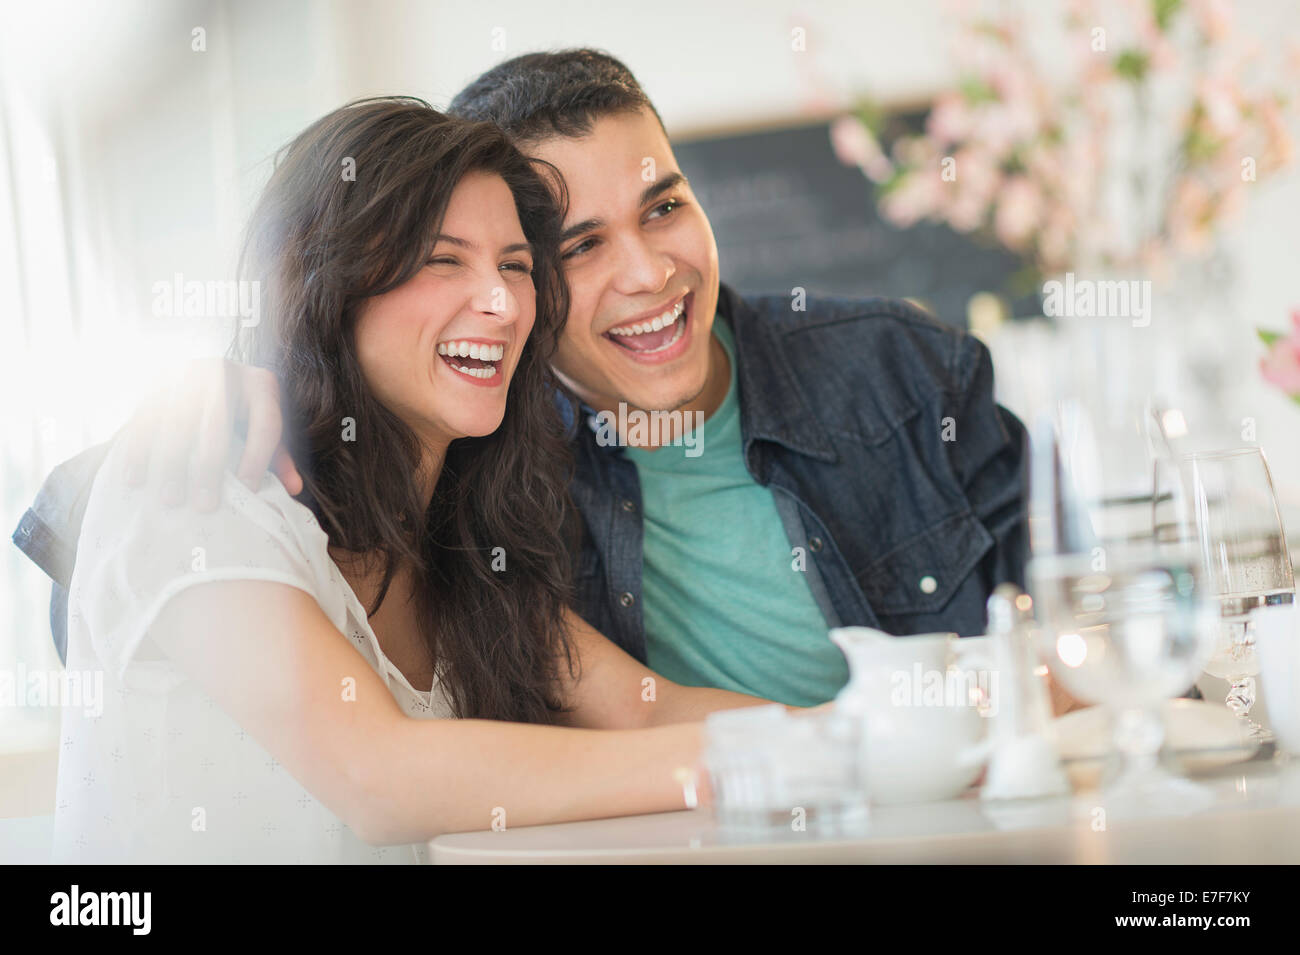 Hispanic couple laughing in cafe Banque D'Images